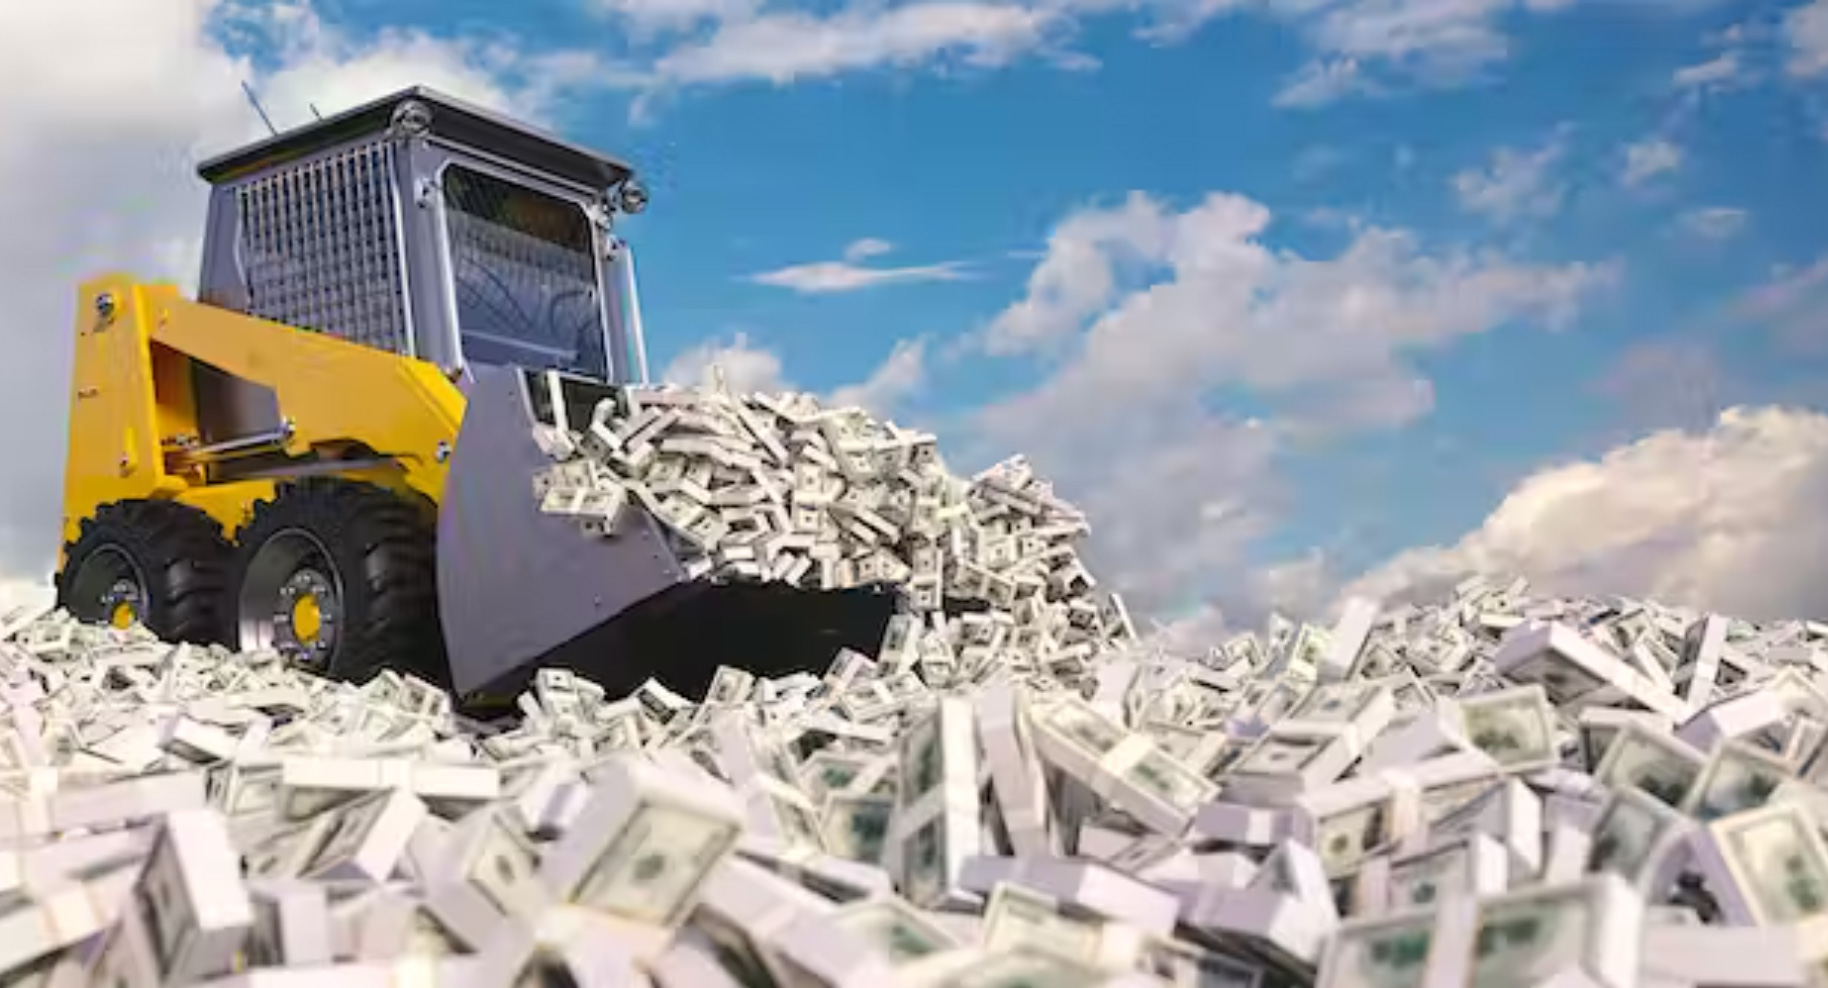 A yellow construction front loader scoops a pile of dollar bills